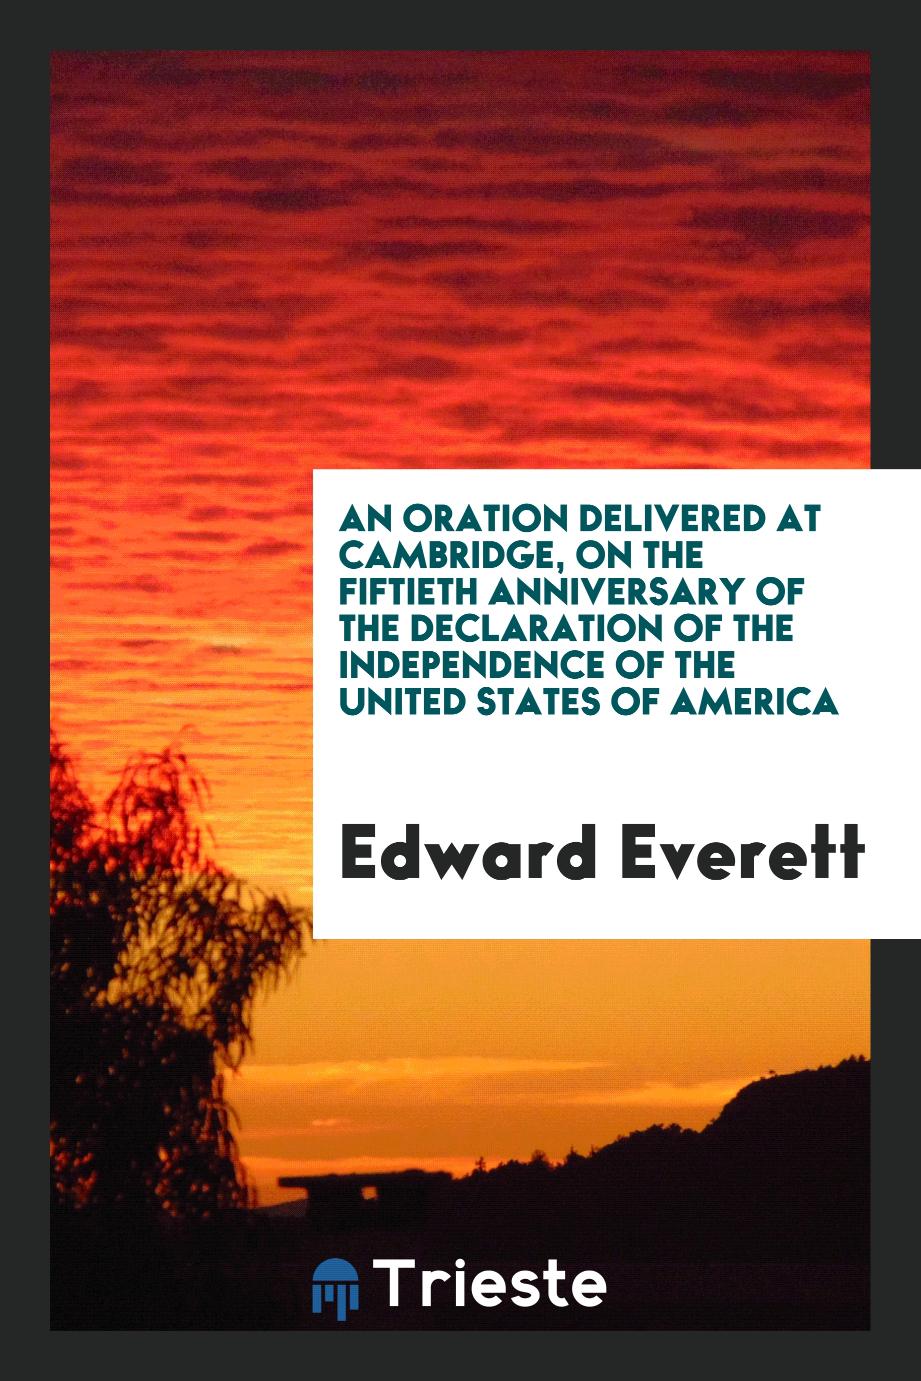 An Oration Delivered at Cambridge, on the Fiftieth Anniversary of the Declaration of the independence of the United States of America